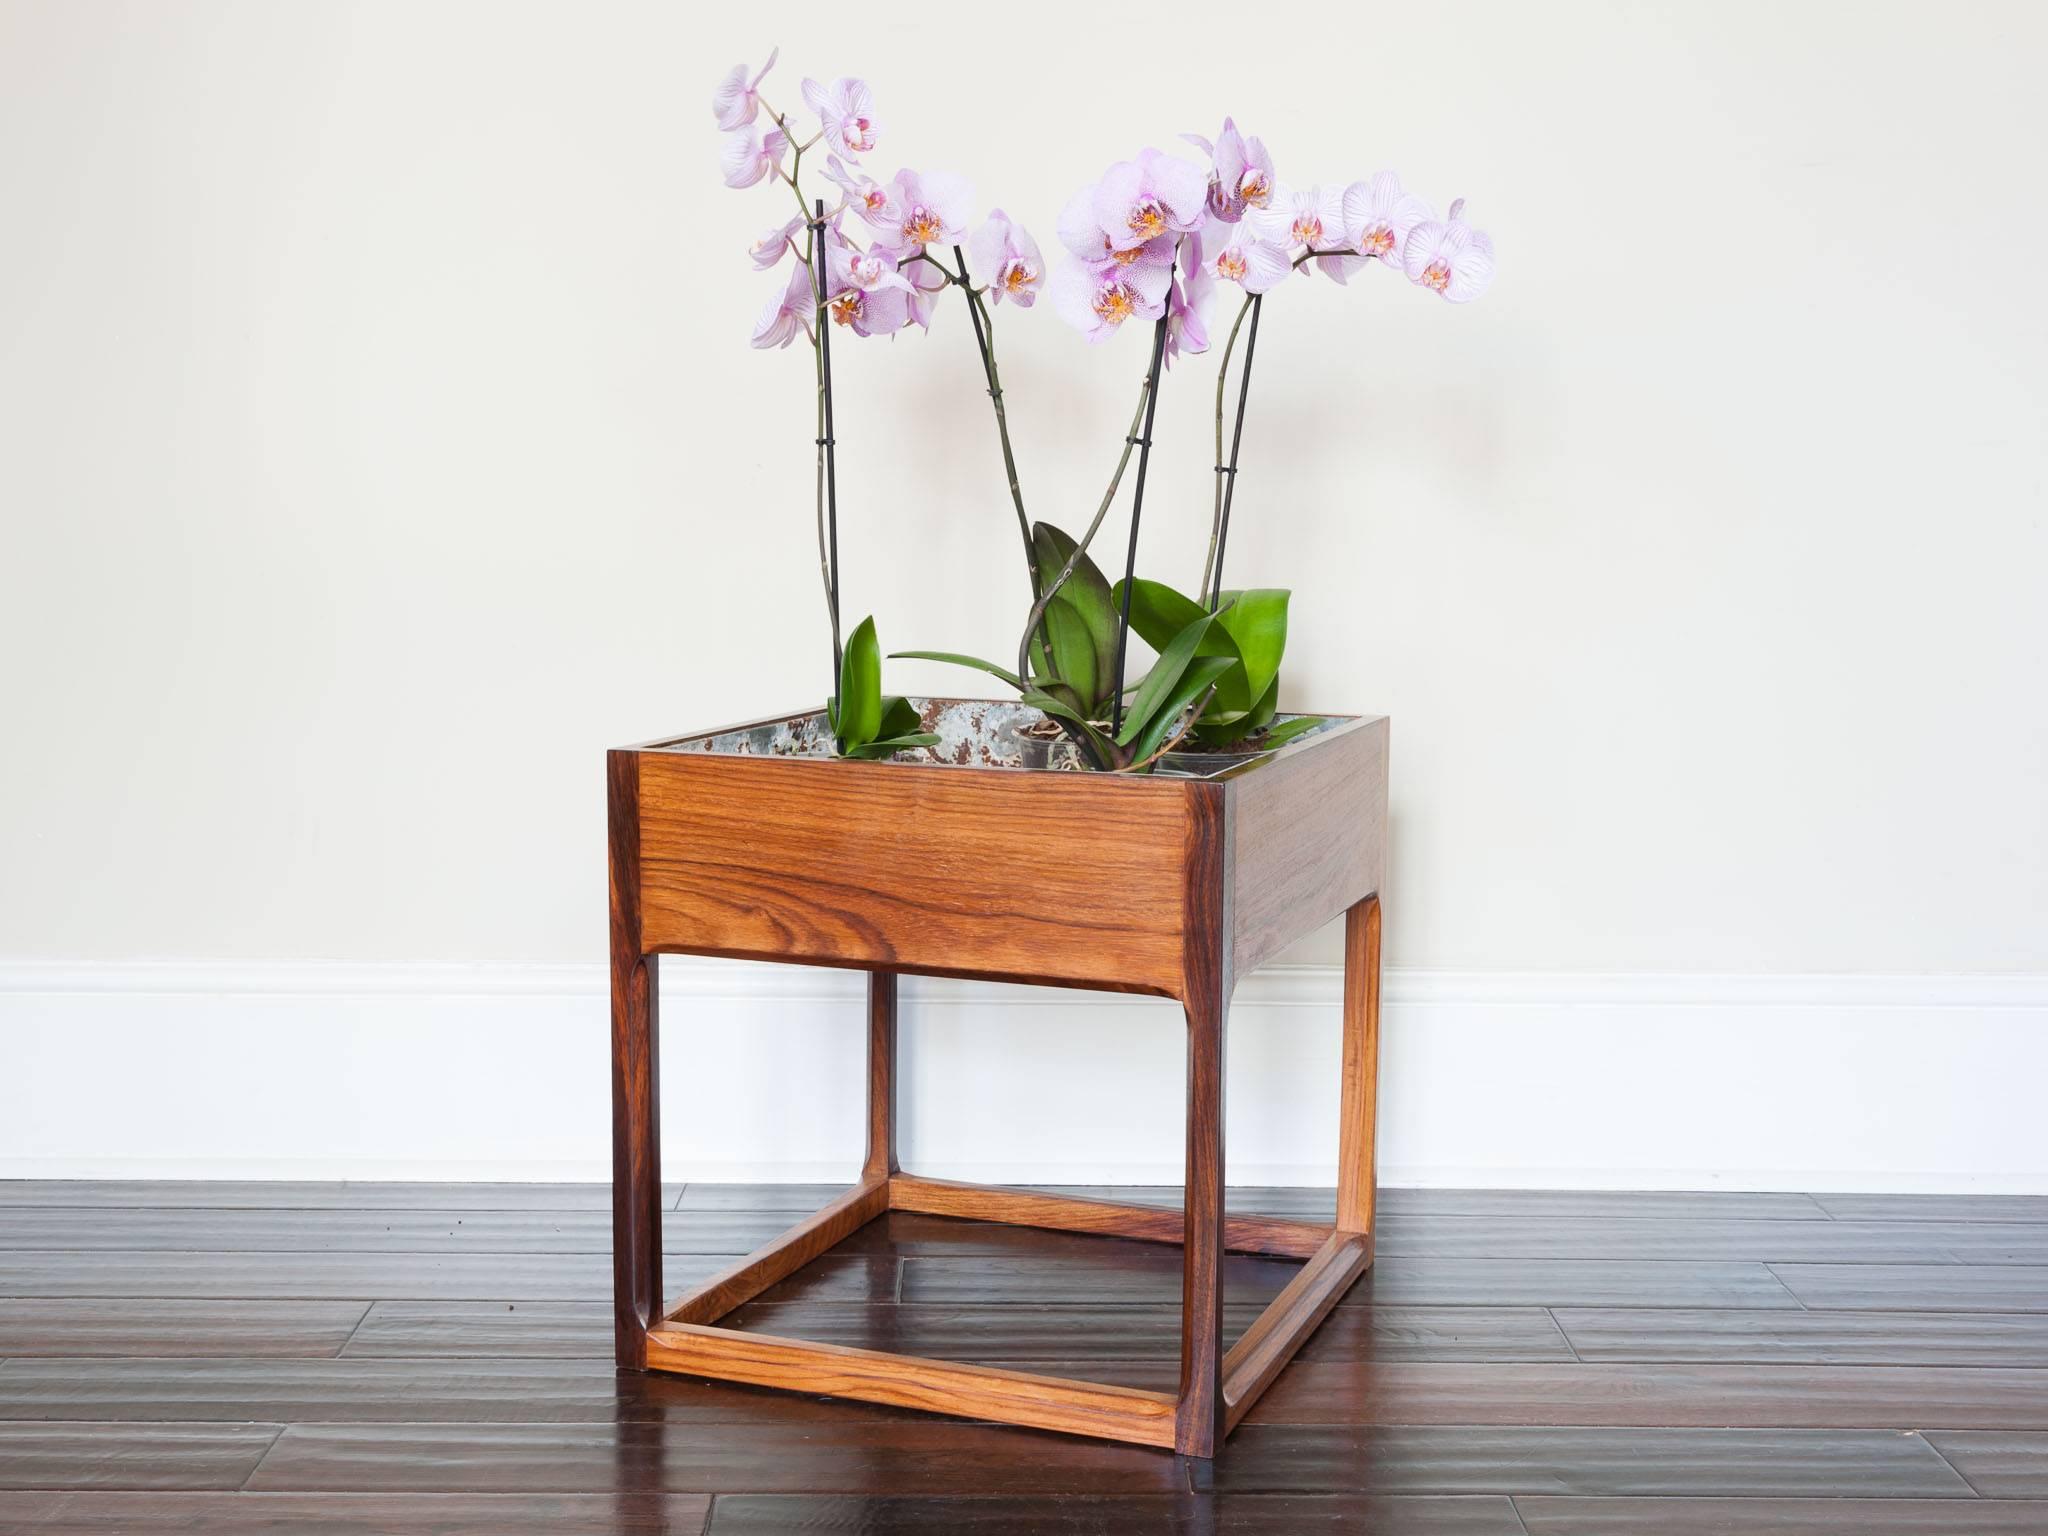 1960s Danish rosewood cubic planter with feature chamfered legs. The metal liner is easily removed with two handles however it is not water tight and is rusty in places as shown in the images. The planter is made of rosewood veneer with solid legs